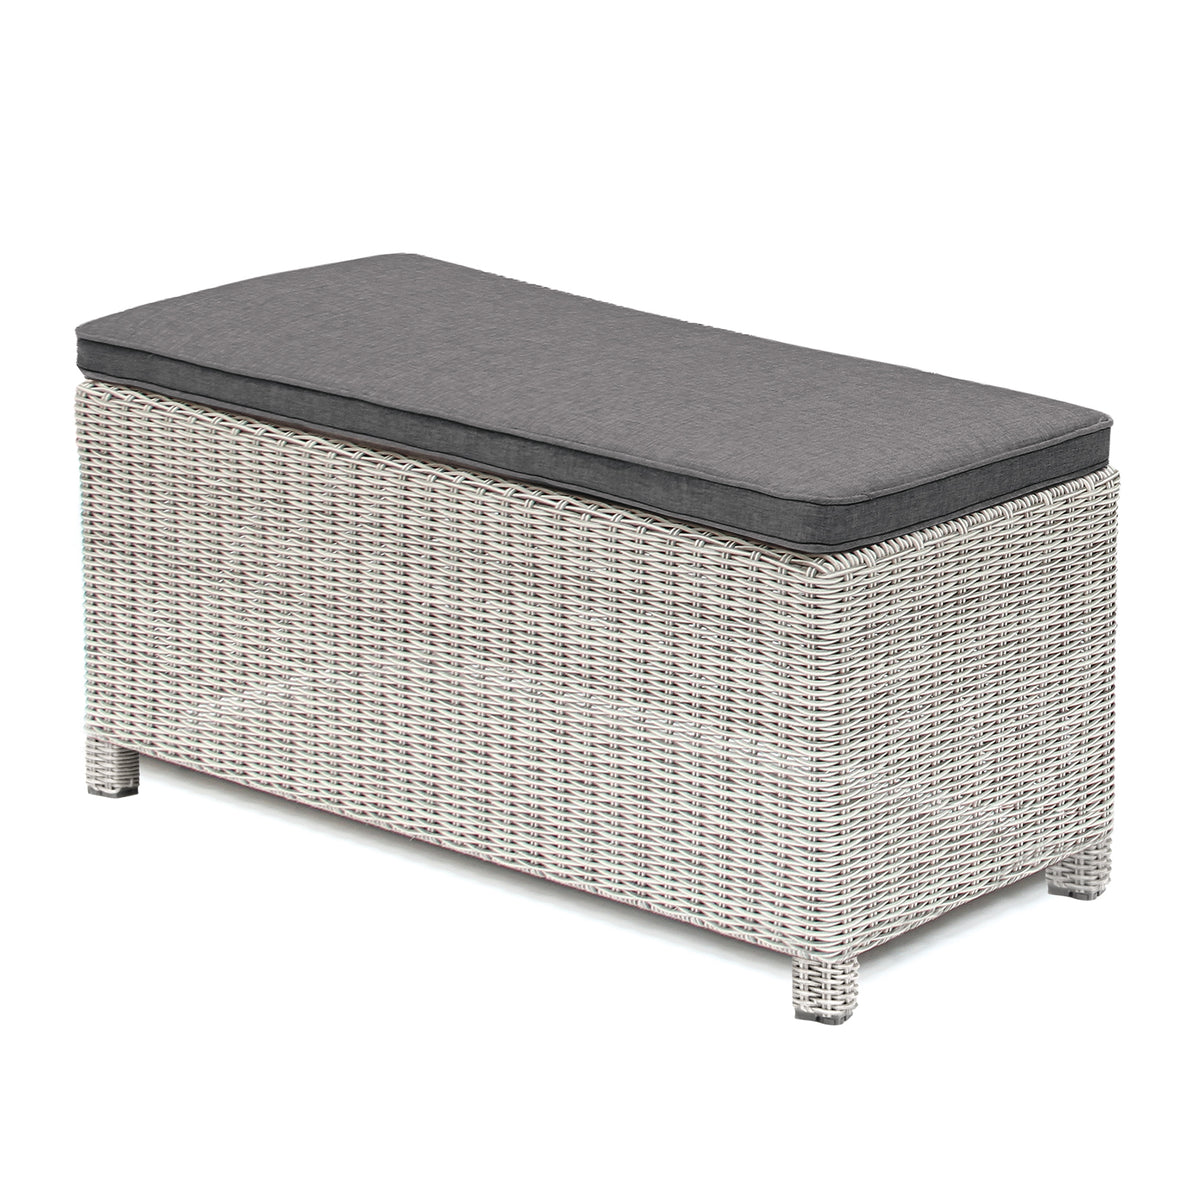 Kettler Palma White Wash Bench with Weatherproof Cushions